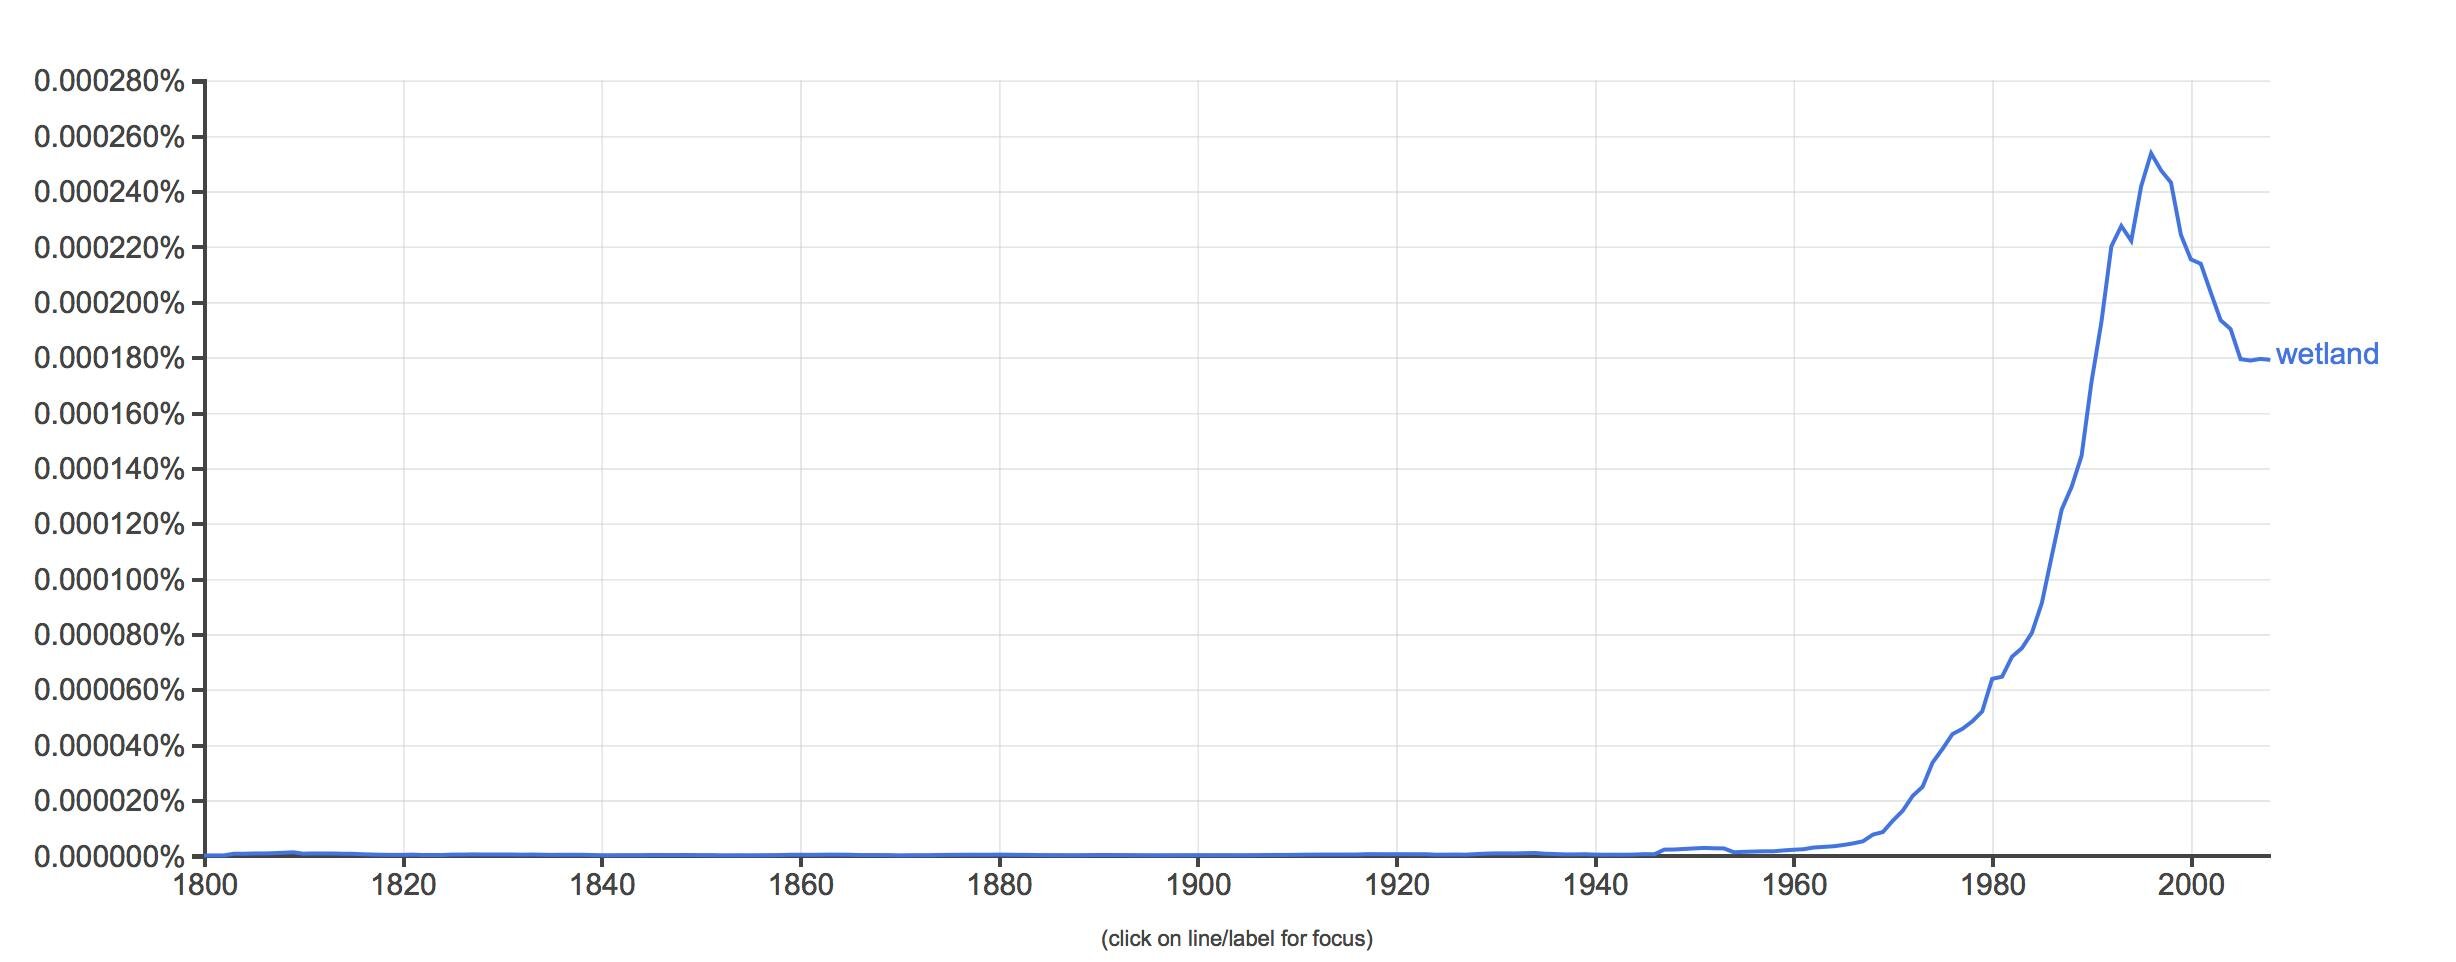 Google frequency of use of word :‘wetland’